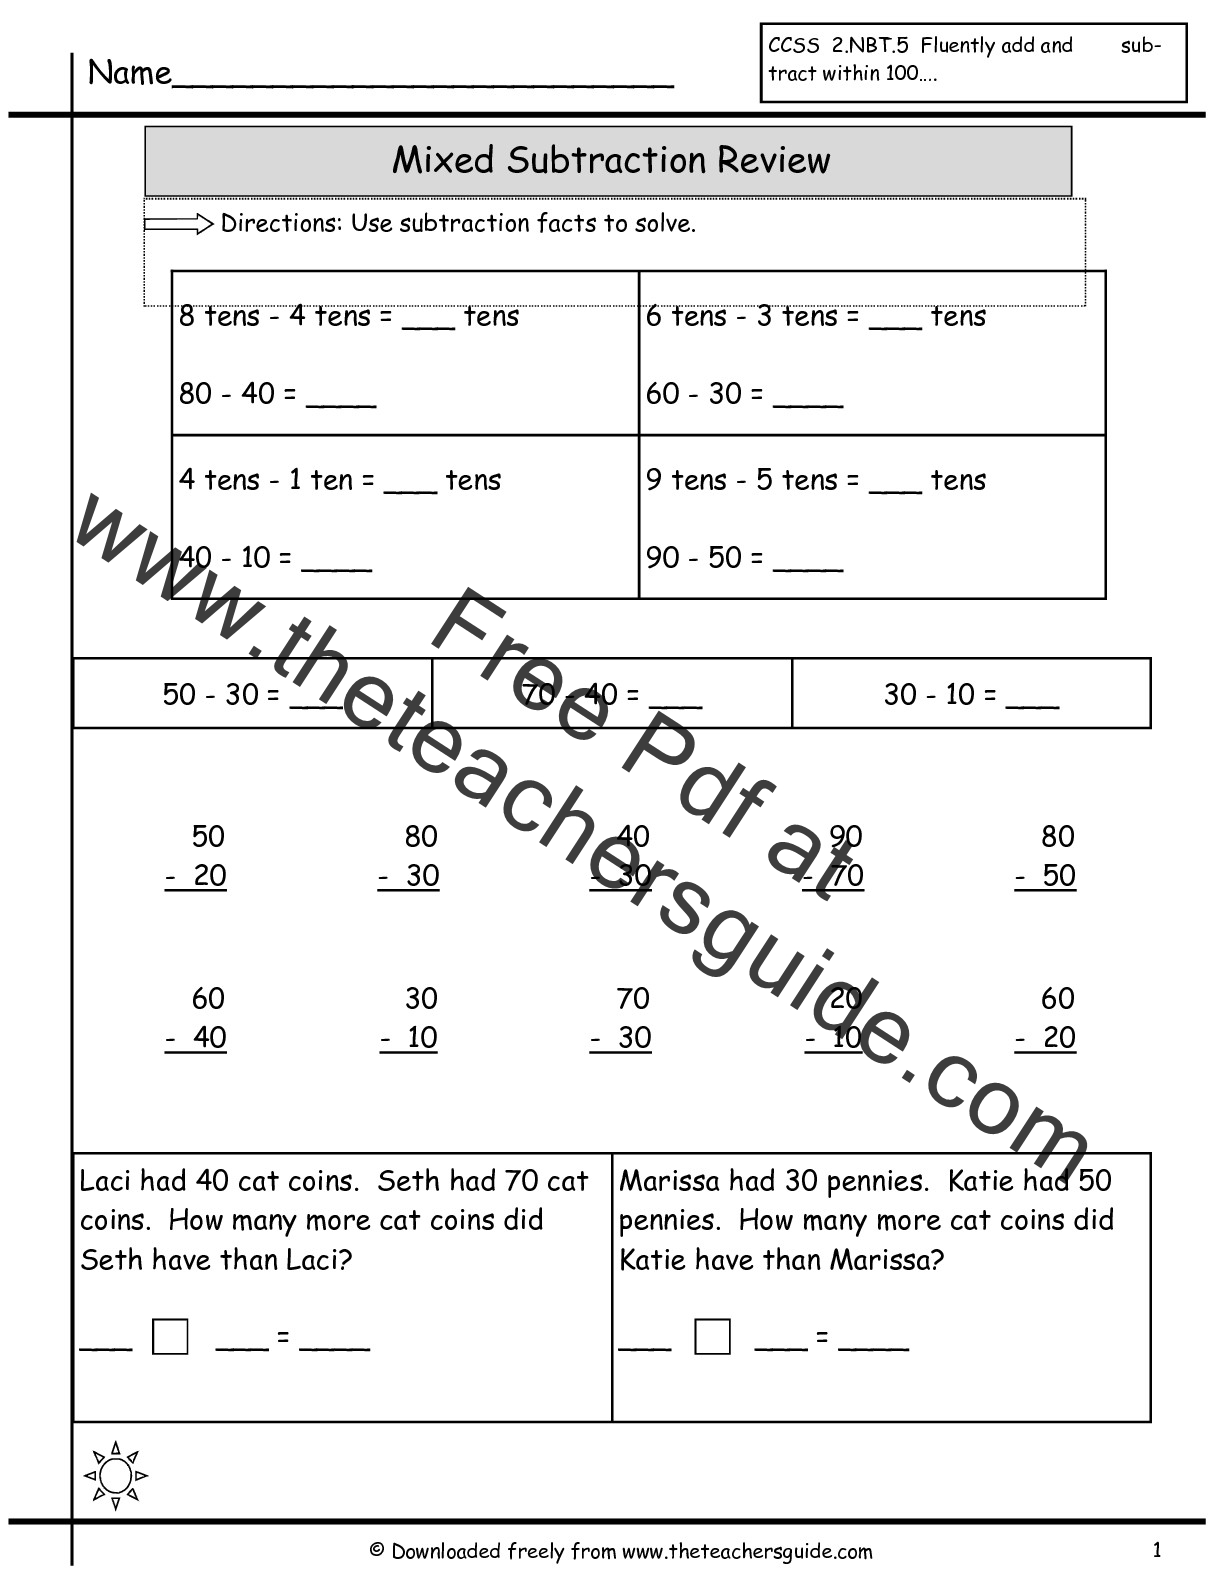 Single Digit Addition Worksheets from The Teacher s Guide